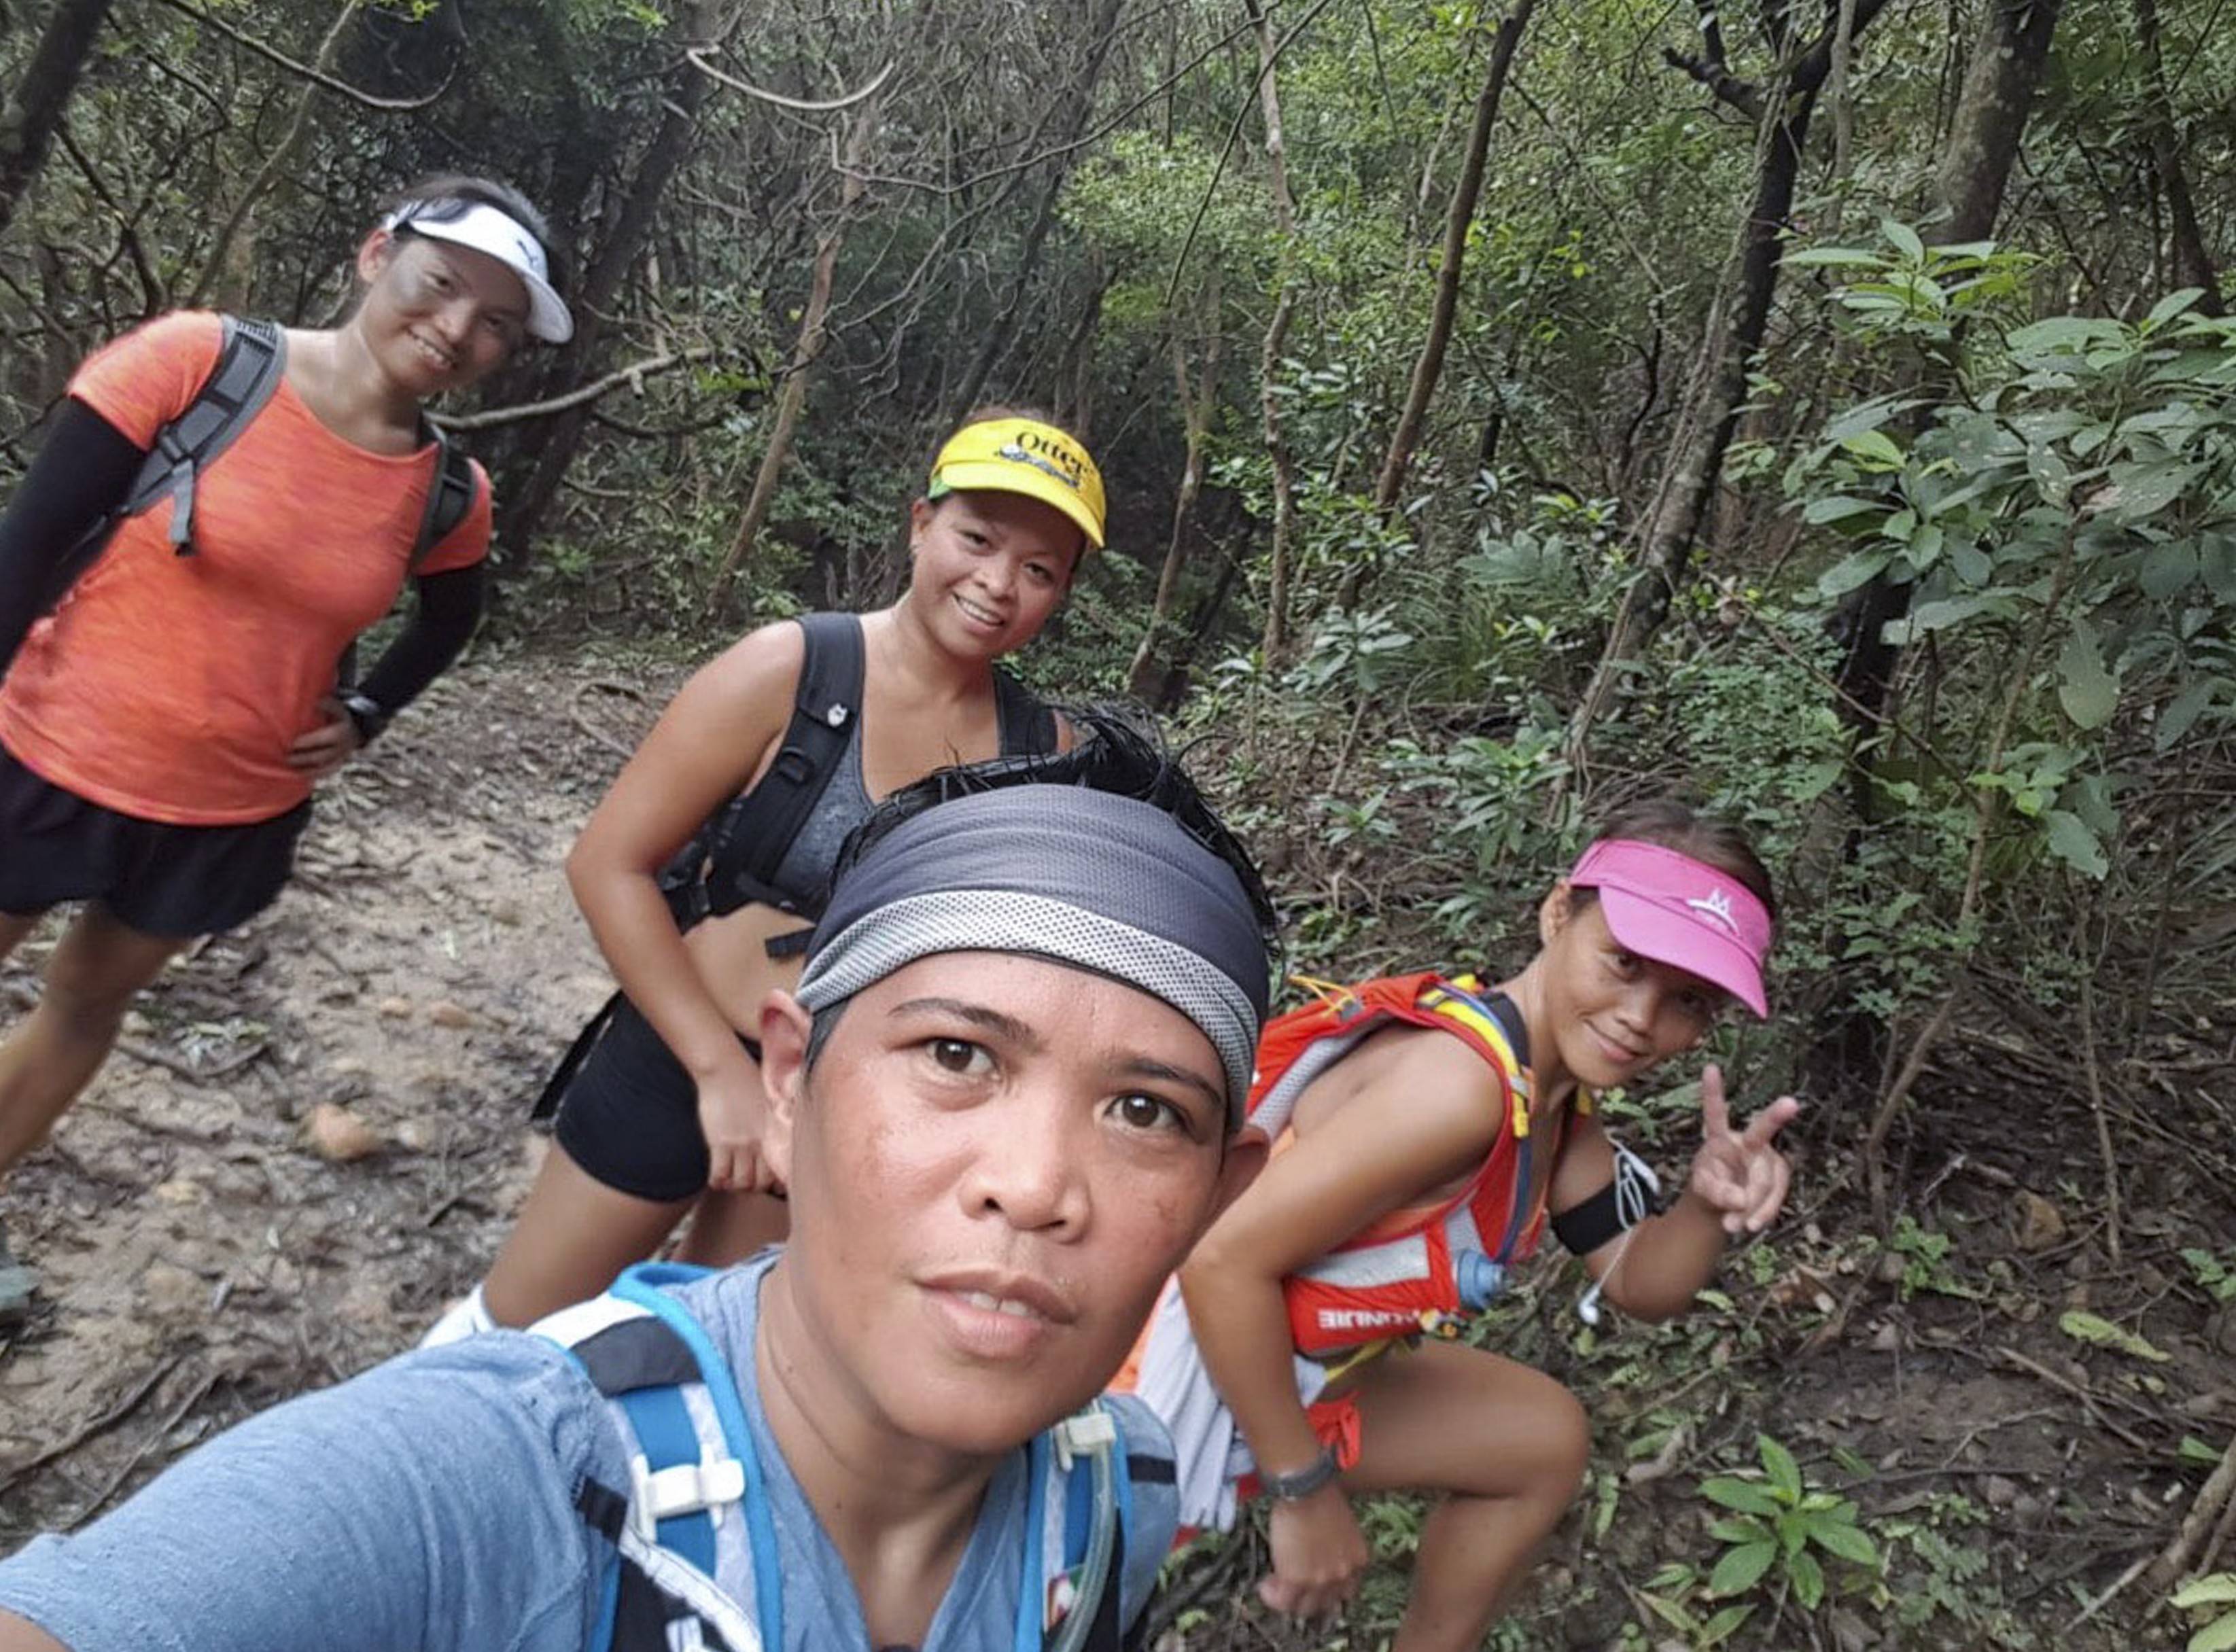 From left: Beverly Martinez, 35, Aleli Pena, 38, Marian America, 43, and Bernadette Durian, 37, will attempt Oxfam Trailwalker. Photo: Handout